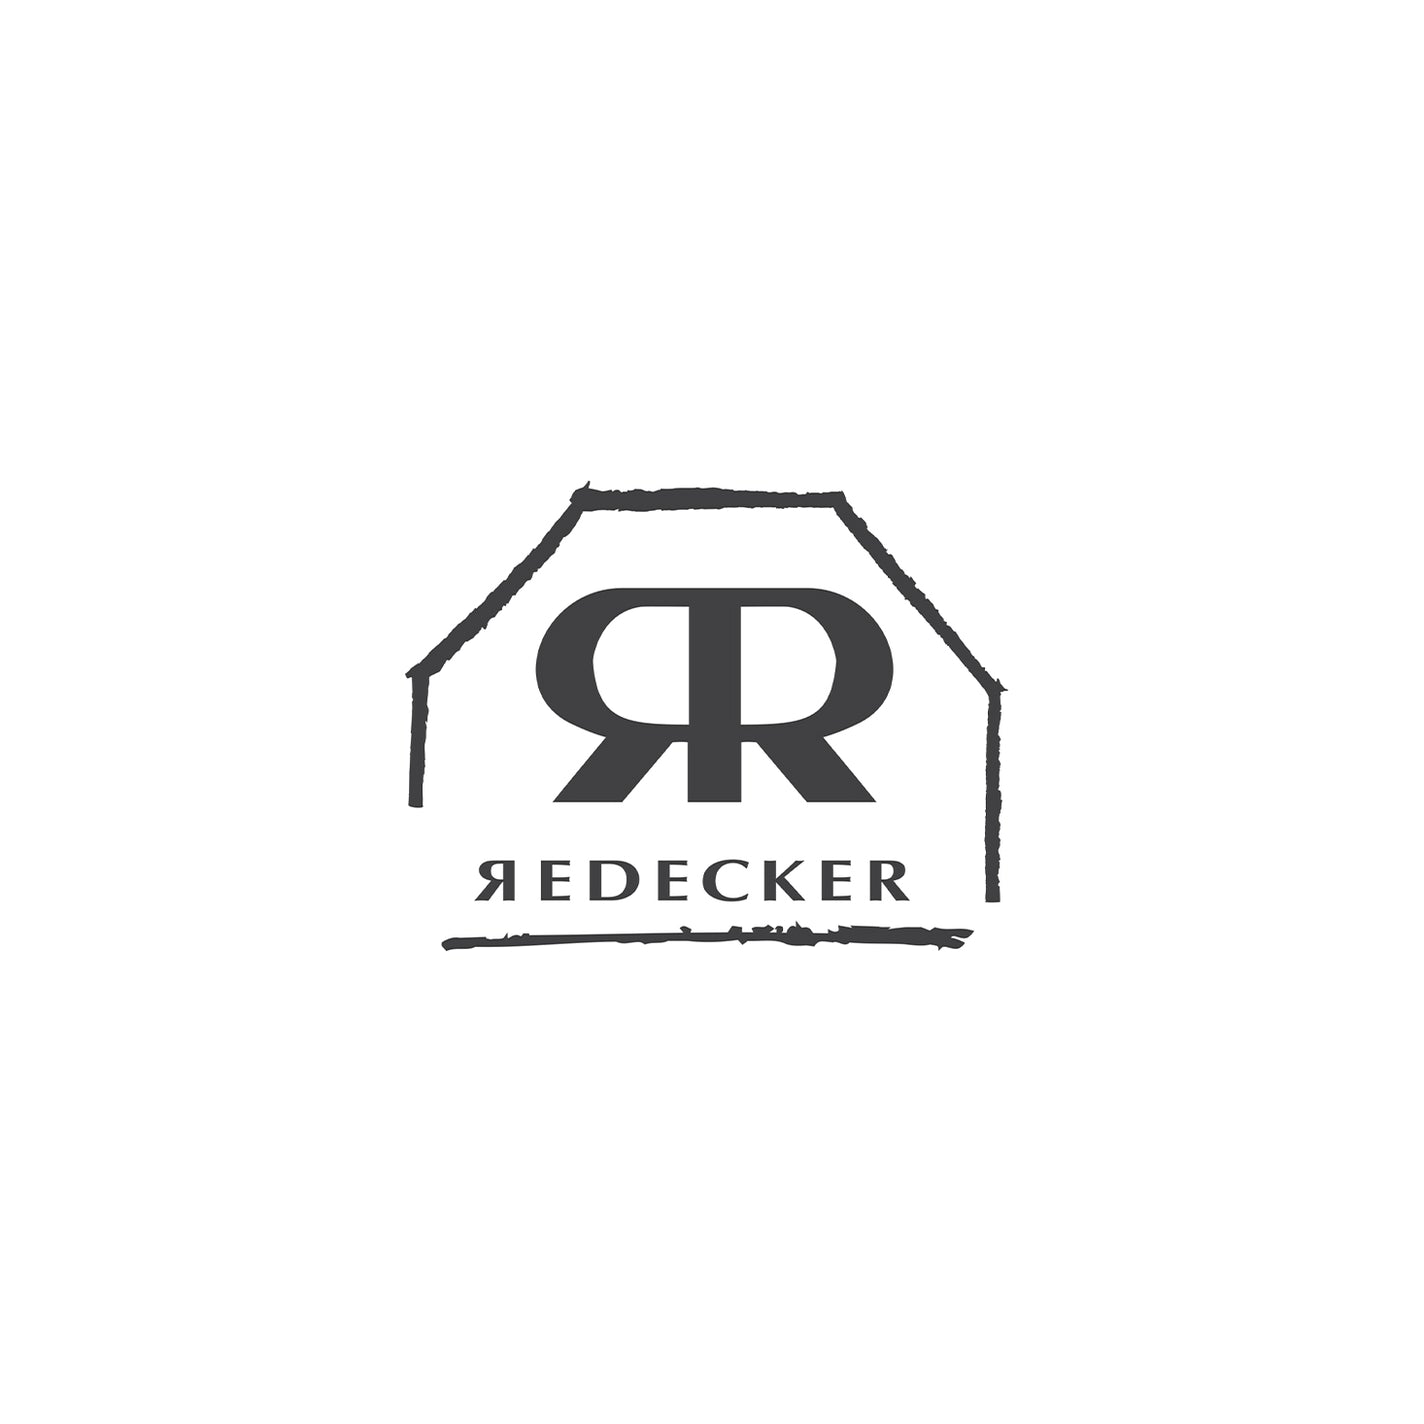 Redecker Thermowood Travel Nail Brush